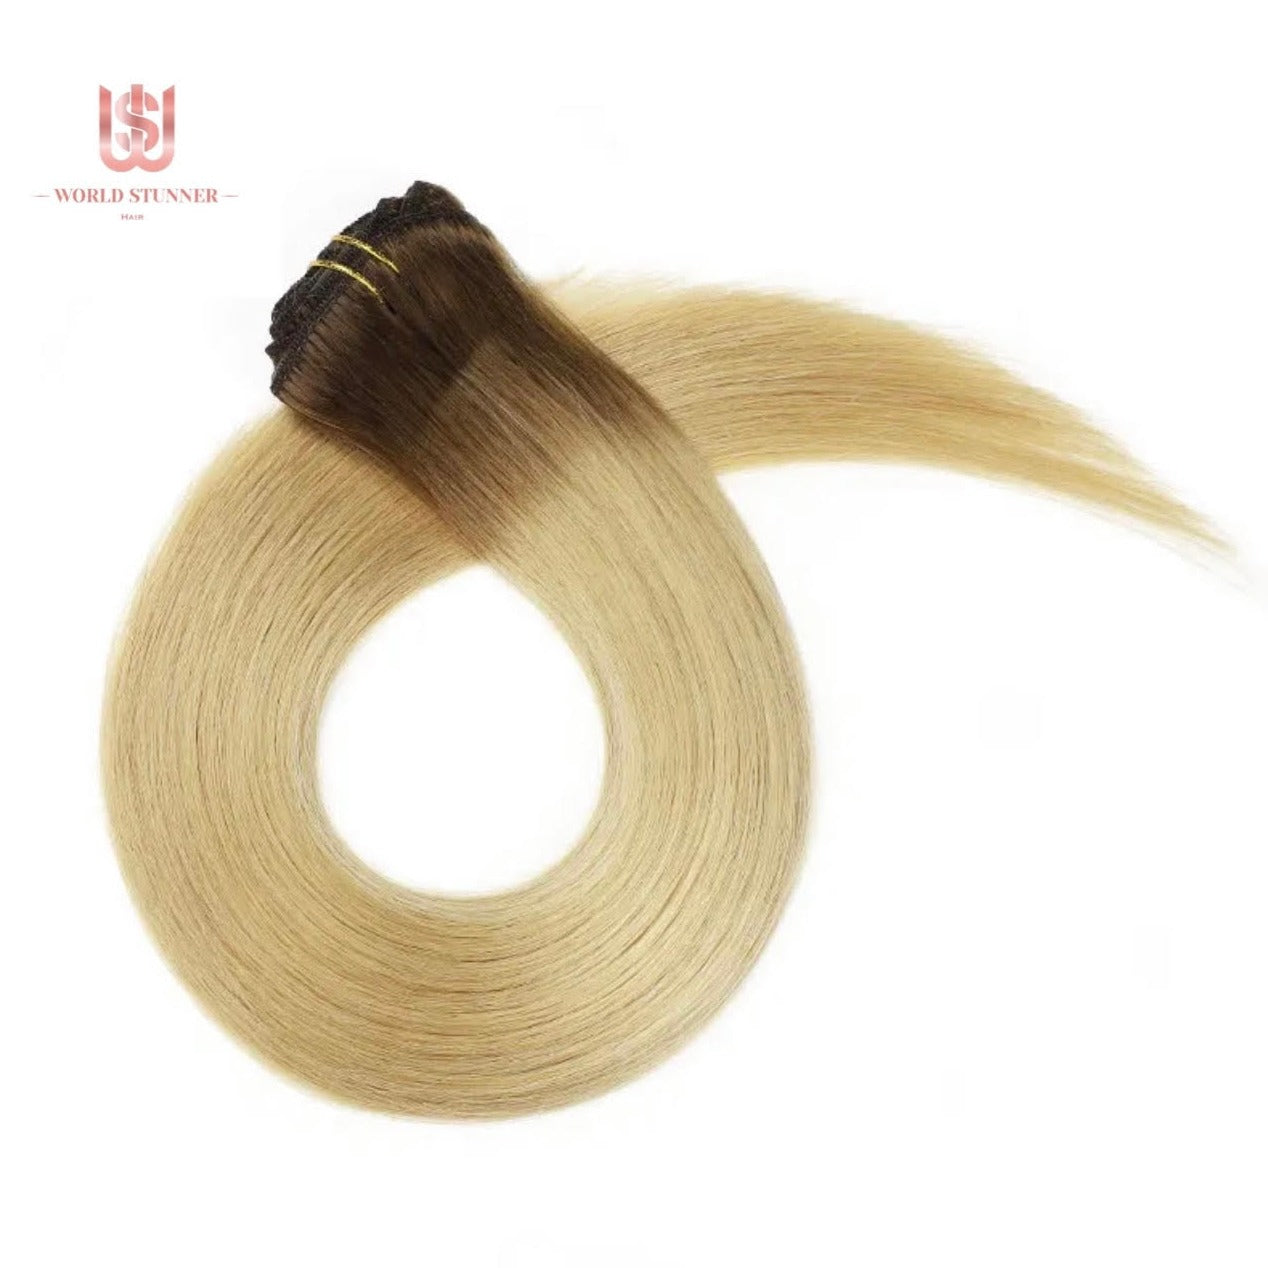 8T/24 BLONDE - SUPER THICK 22” 7 PIECE STRAIGHT CLIPS IN HAIR EXTENSIONS